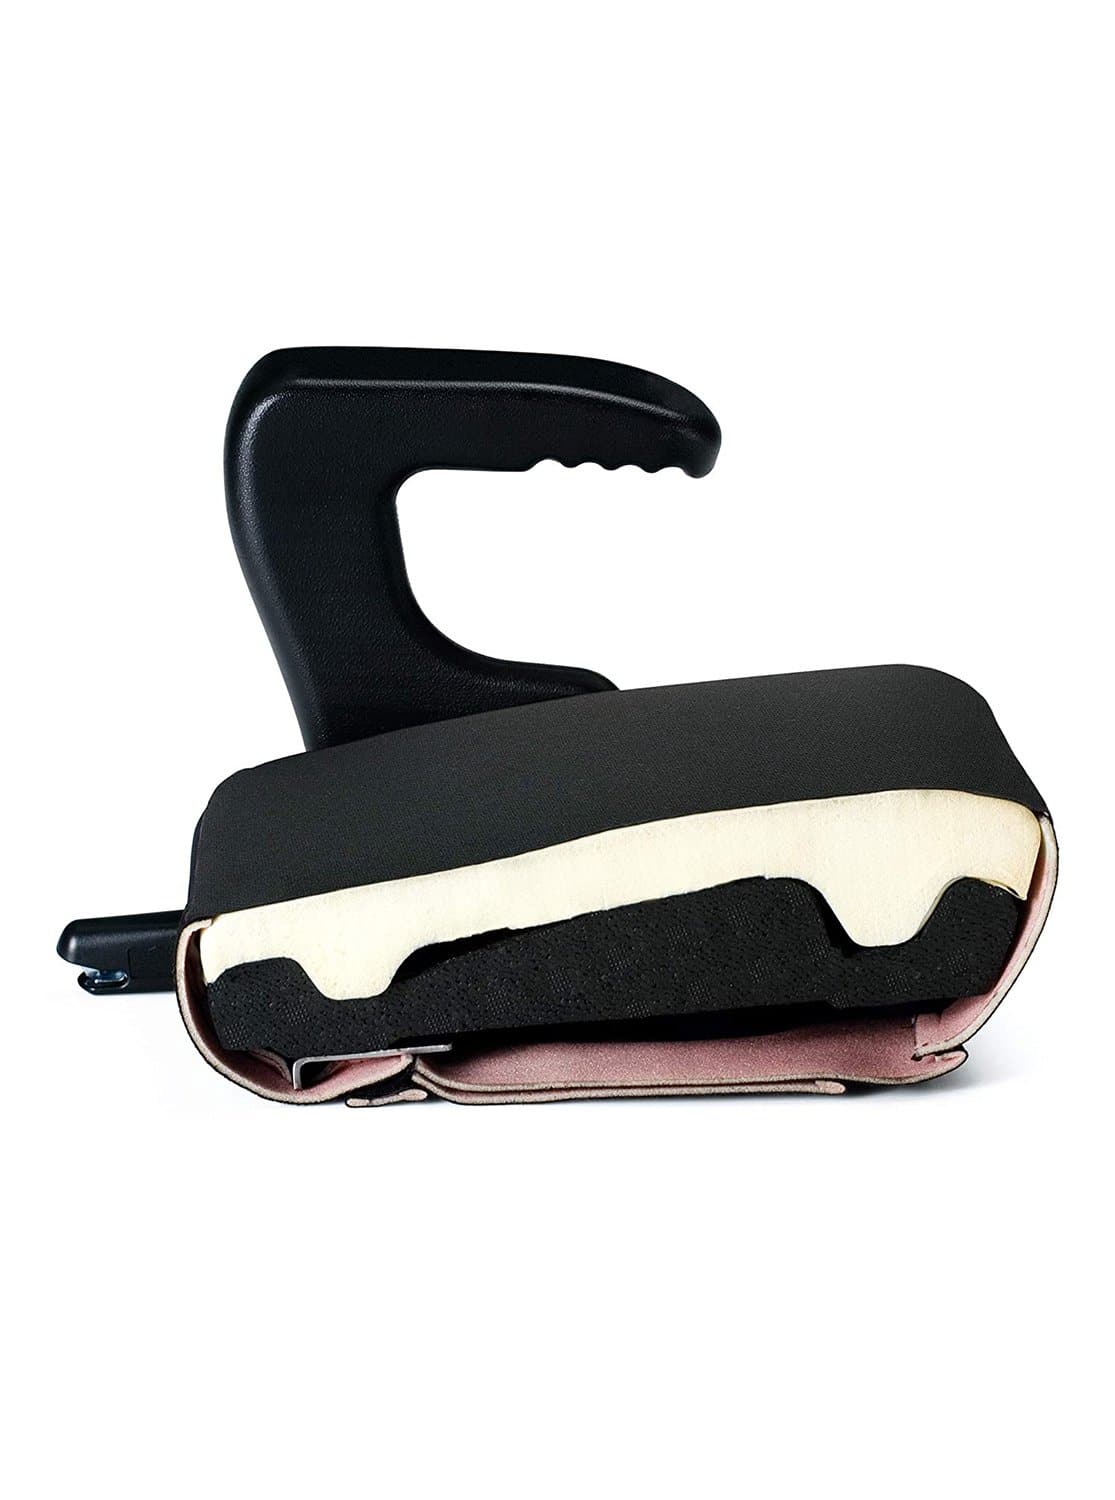 CLEK Ozzi LATCHing Backless Booster Car Seat - Carbon - ANB Baby -$75 - $100